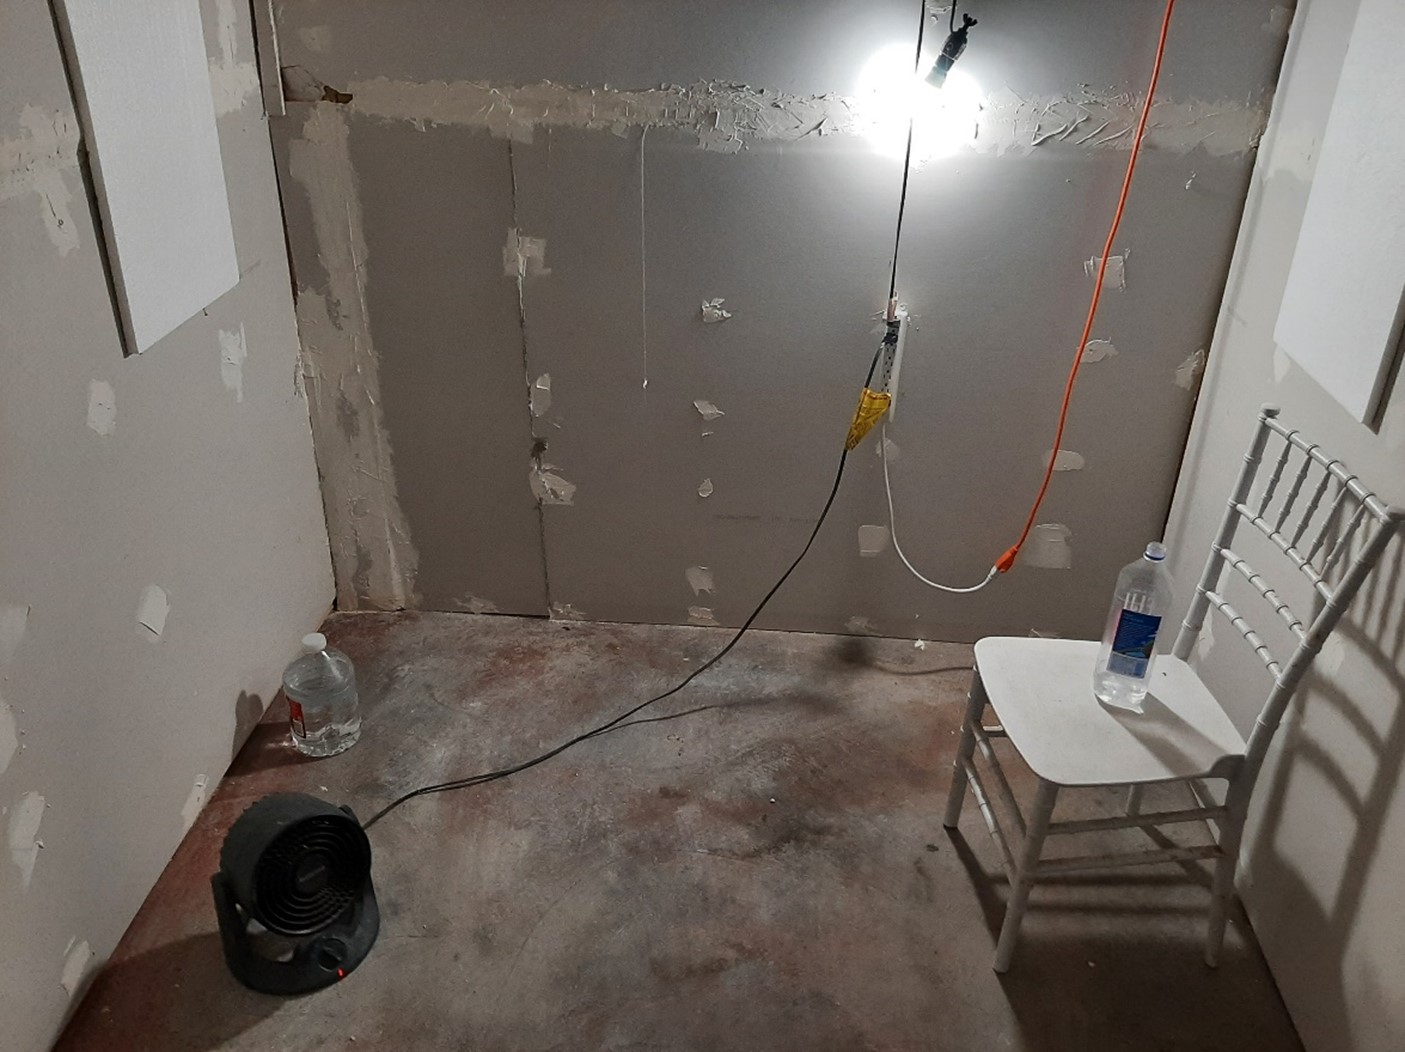 A woman escaped this cinderblock cell after being held hostage at a home in Klamath Falls, Ore.